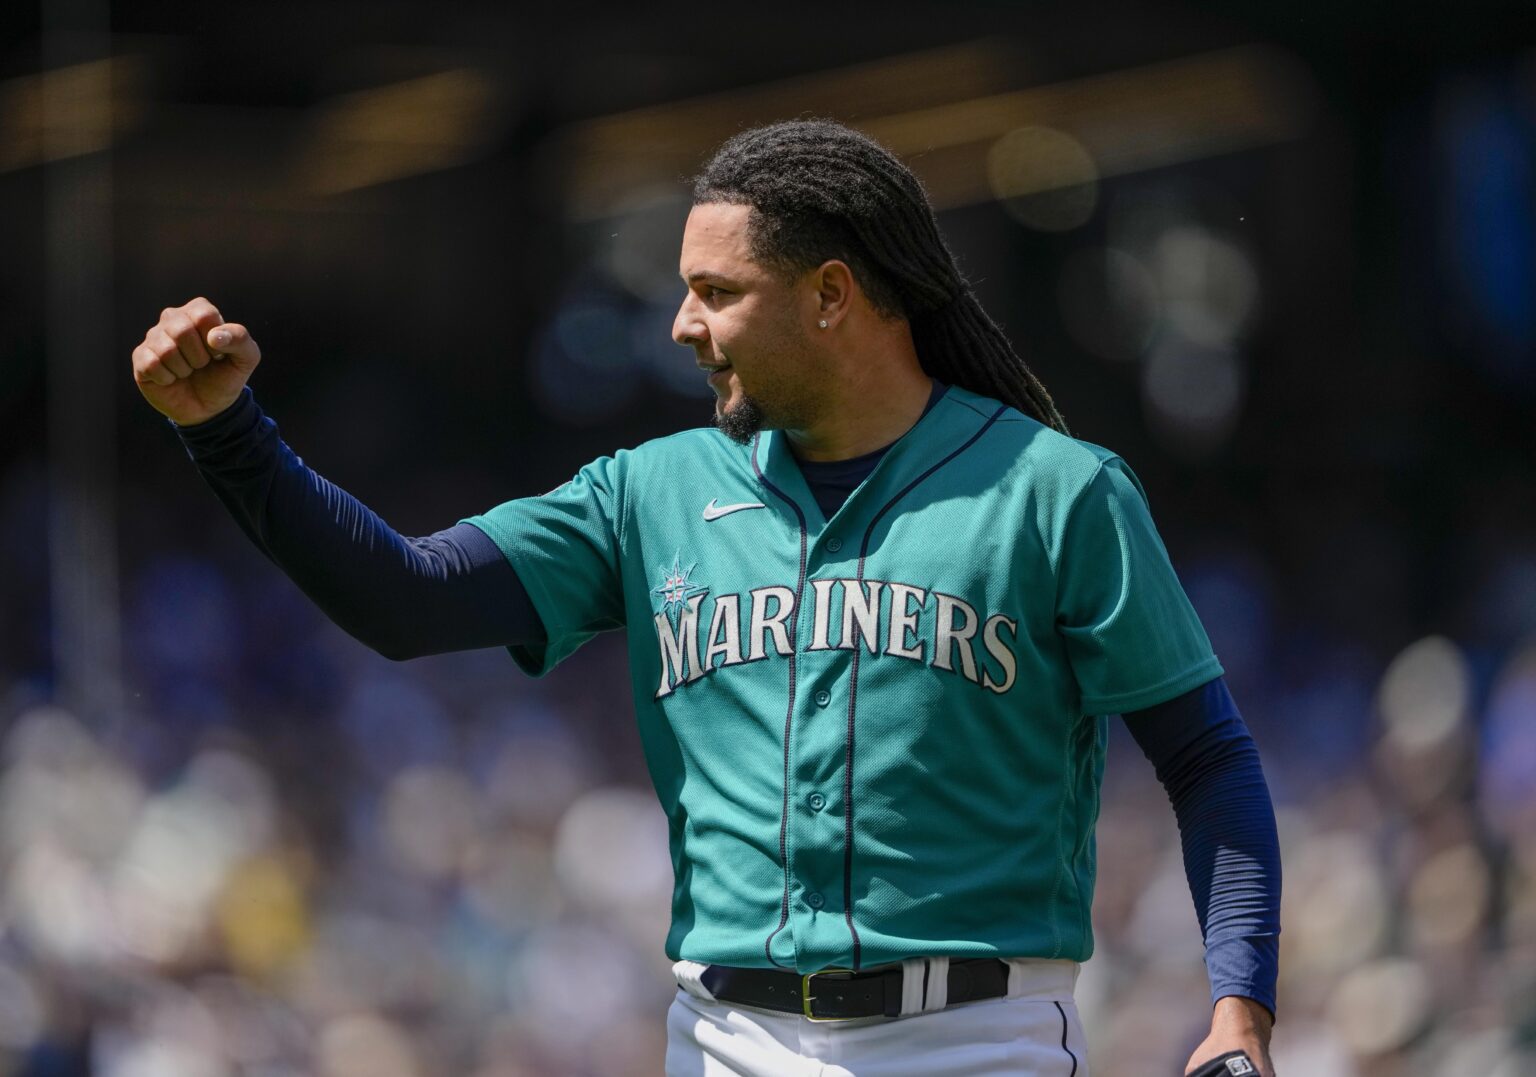 Seattle Mariners starting pitcher Luis Castillo reacts after pitching against the Pittsburgh Pirates during the fifth inning of a baseball game Saturday